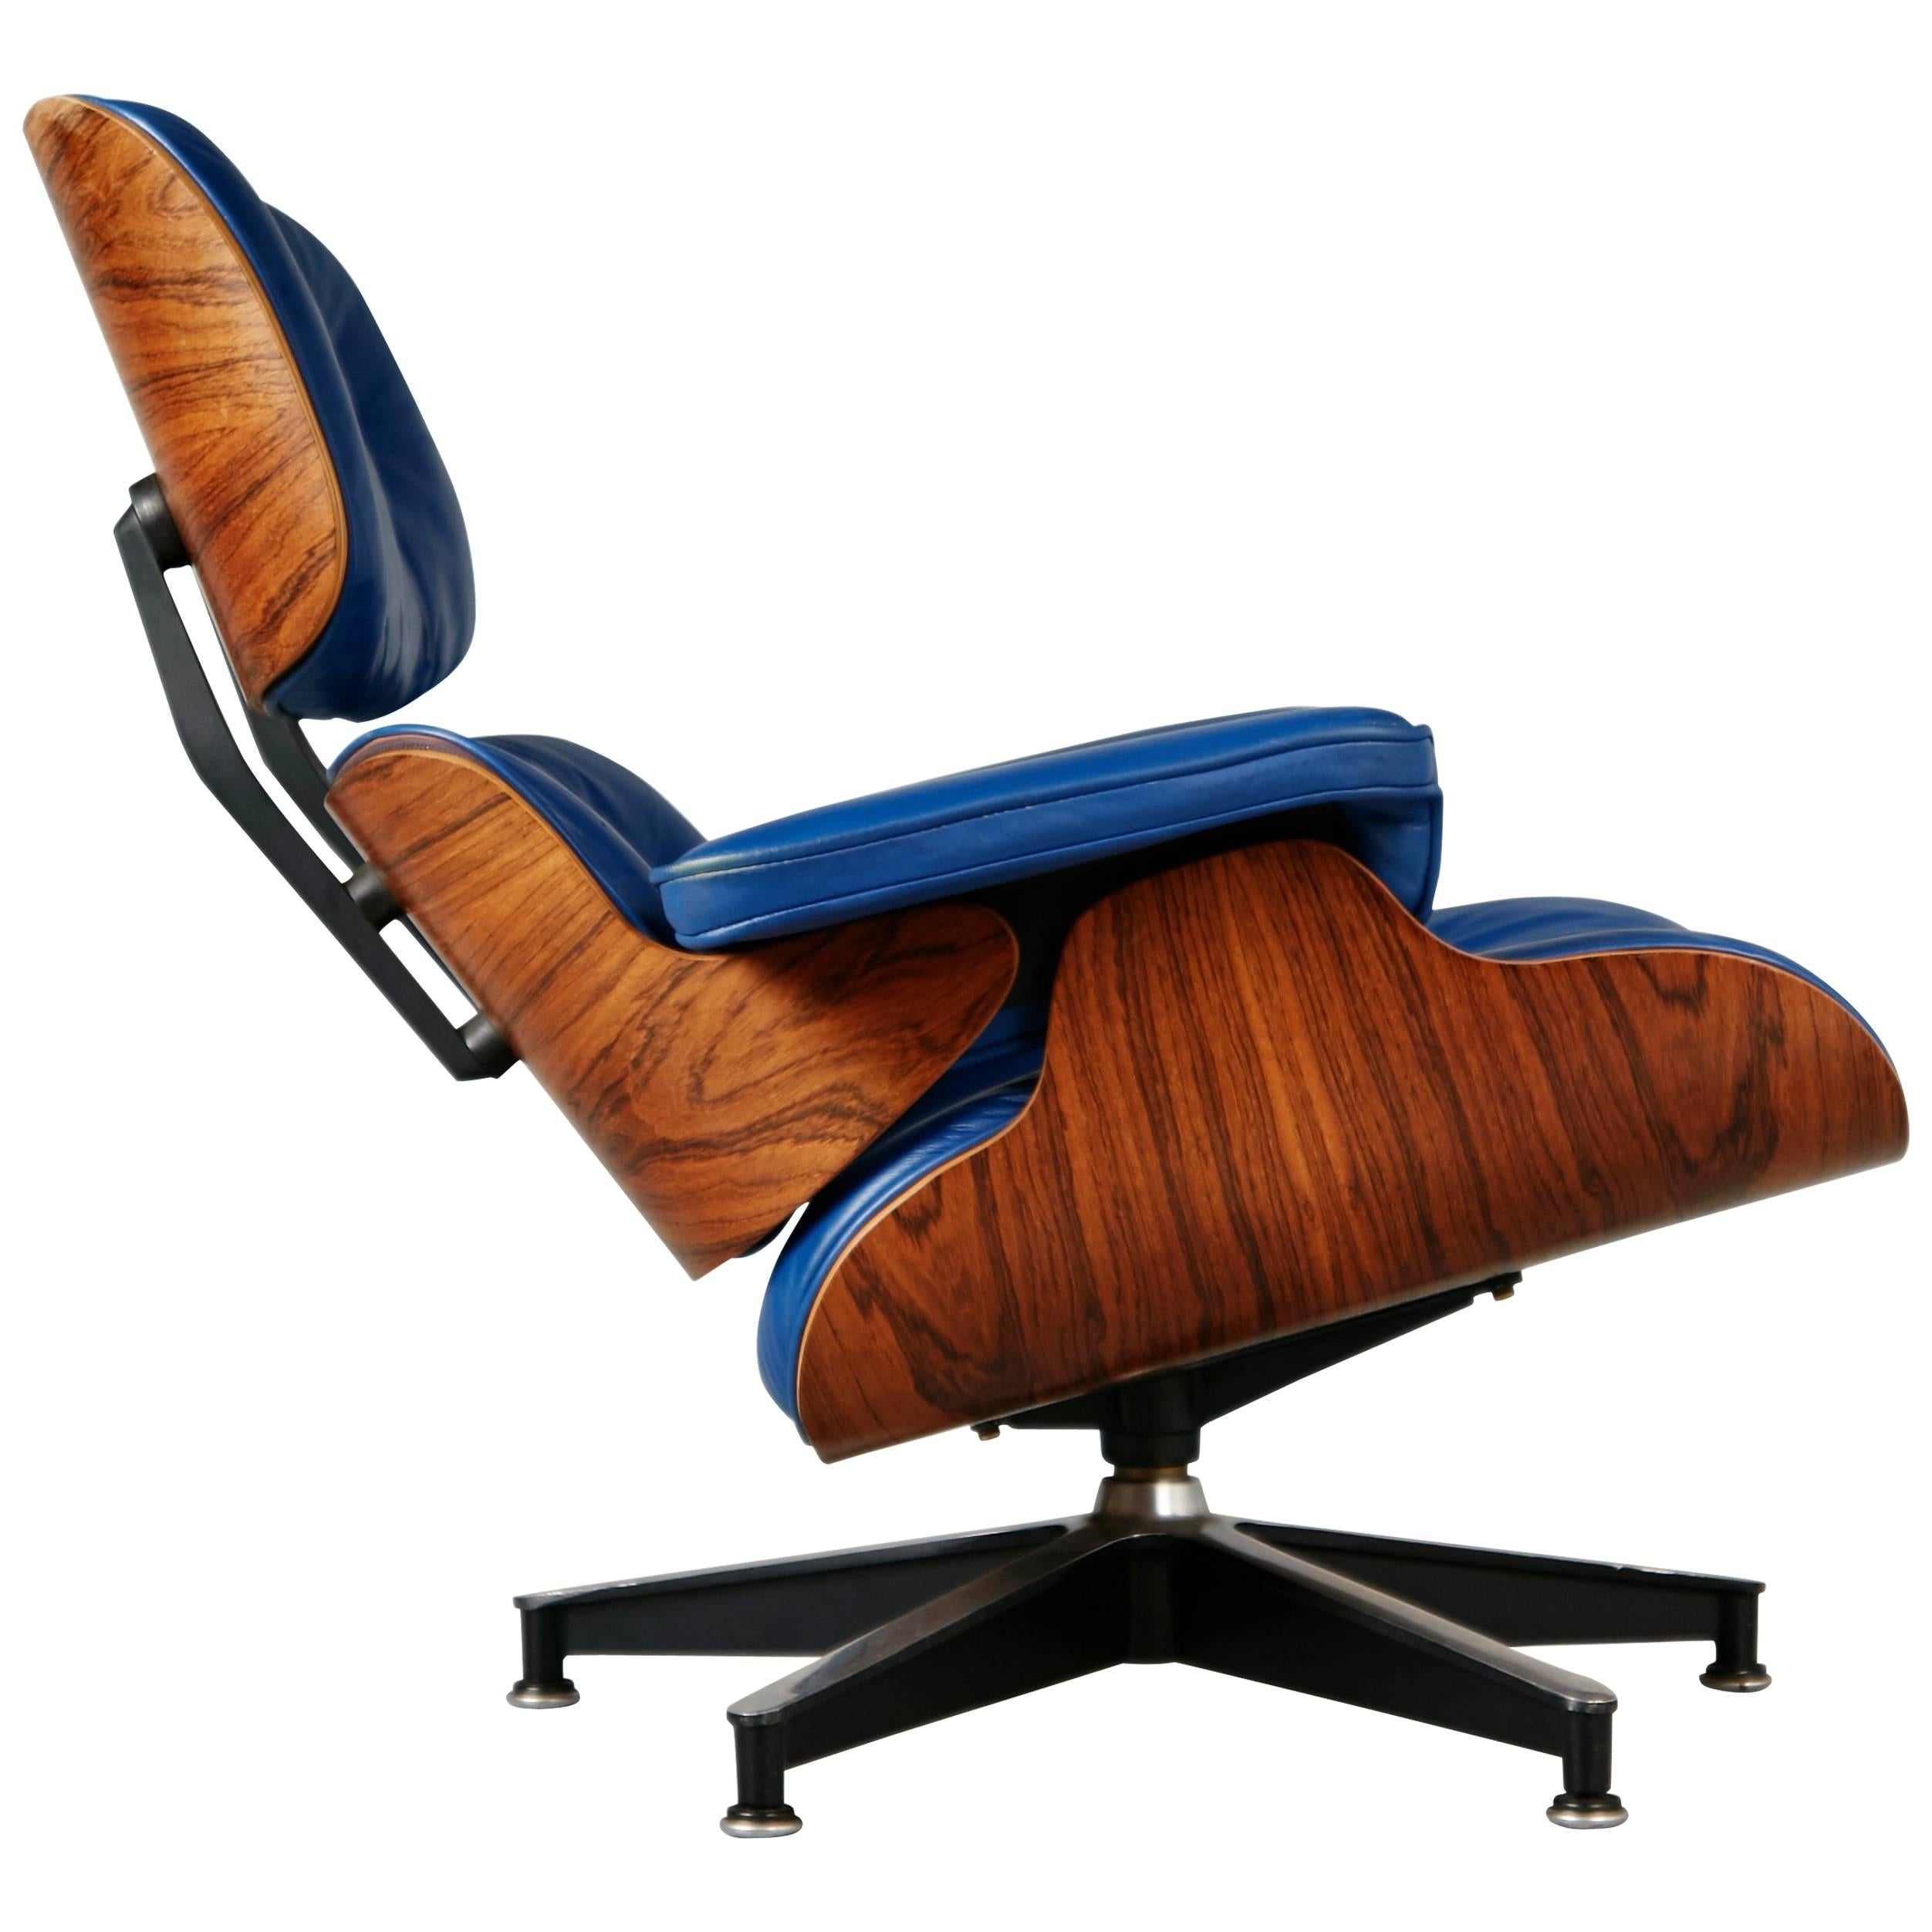 Blue Leather and Rosewood Eames Lounge Chair 670 for Herman Miller, circa 1960